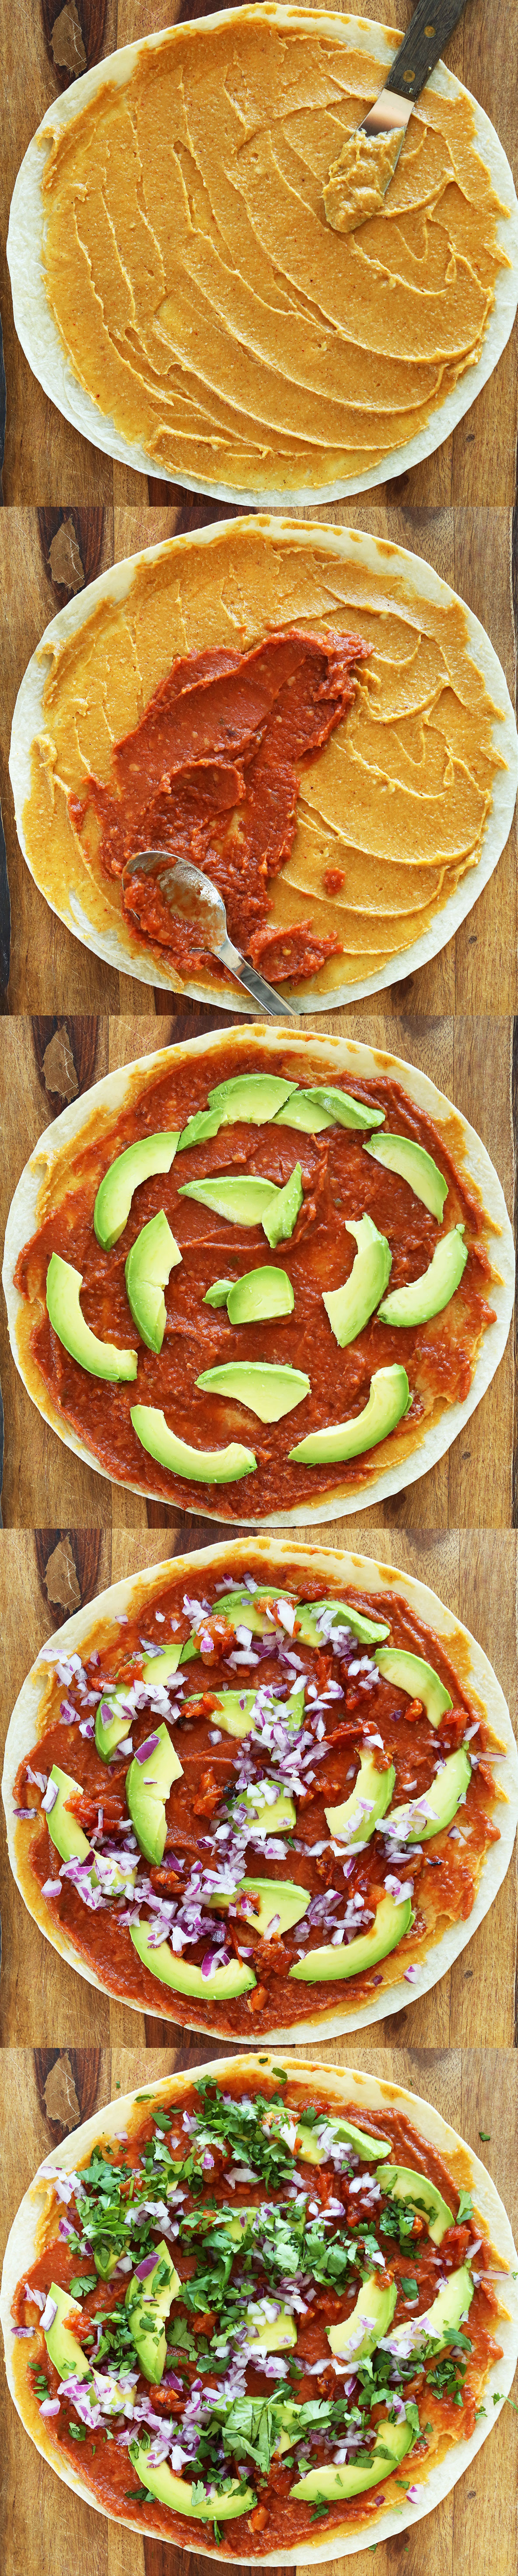 Photos showing layers of ingredients spread onto a tortilla for Mexican Pinwheels